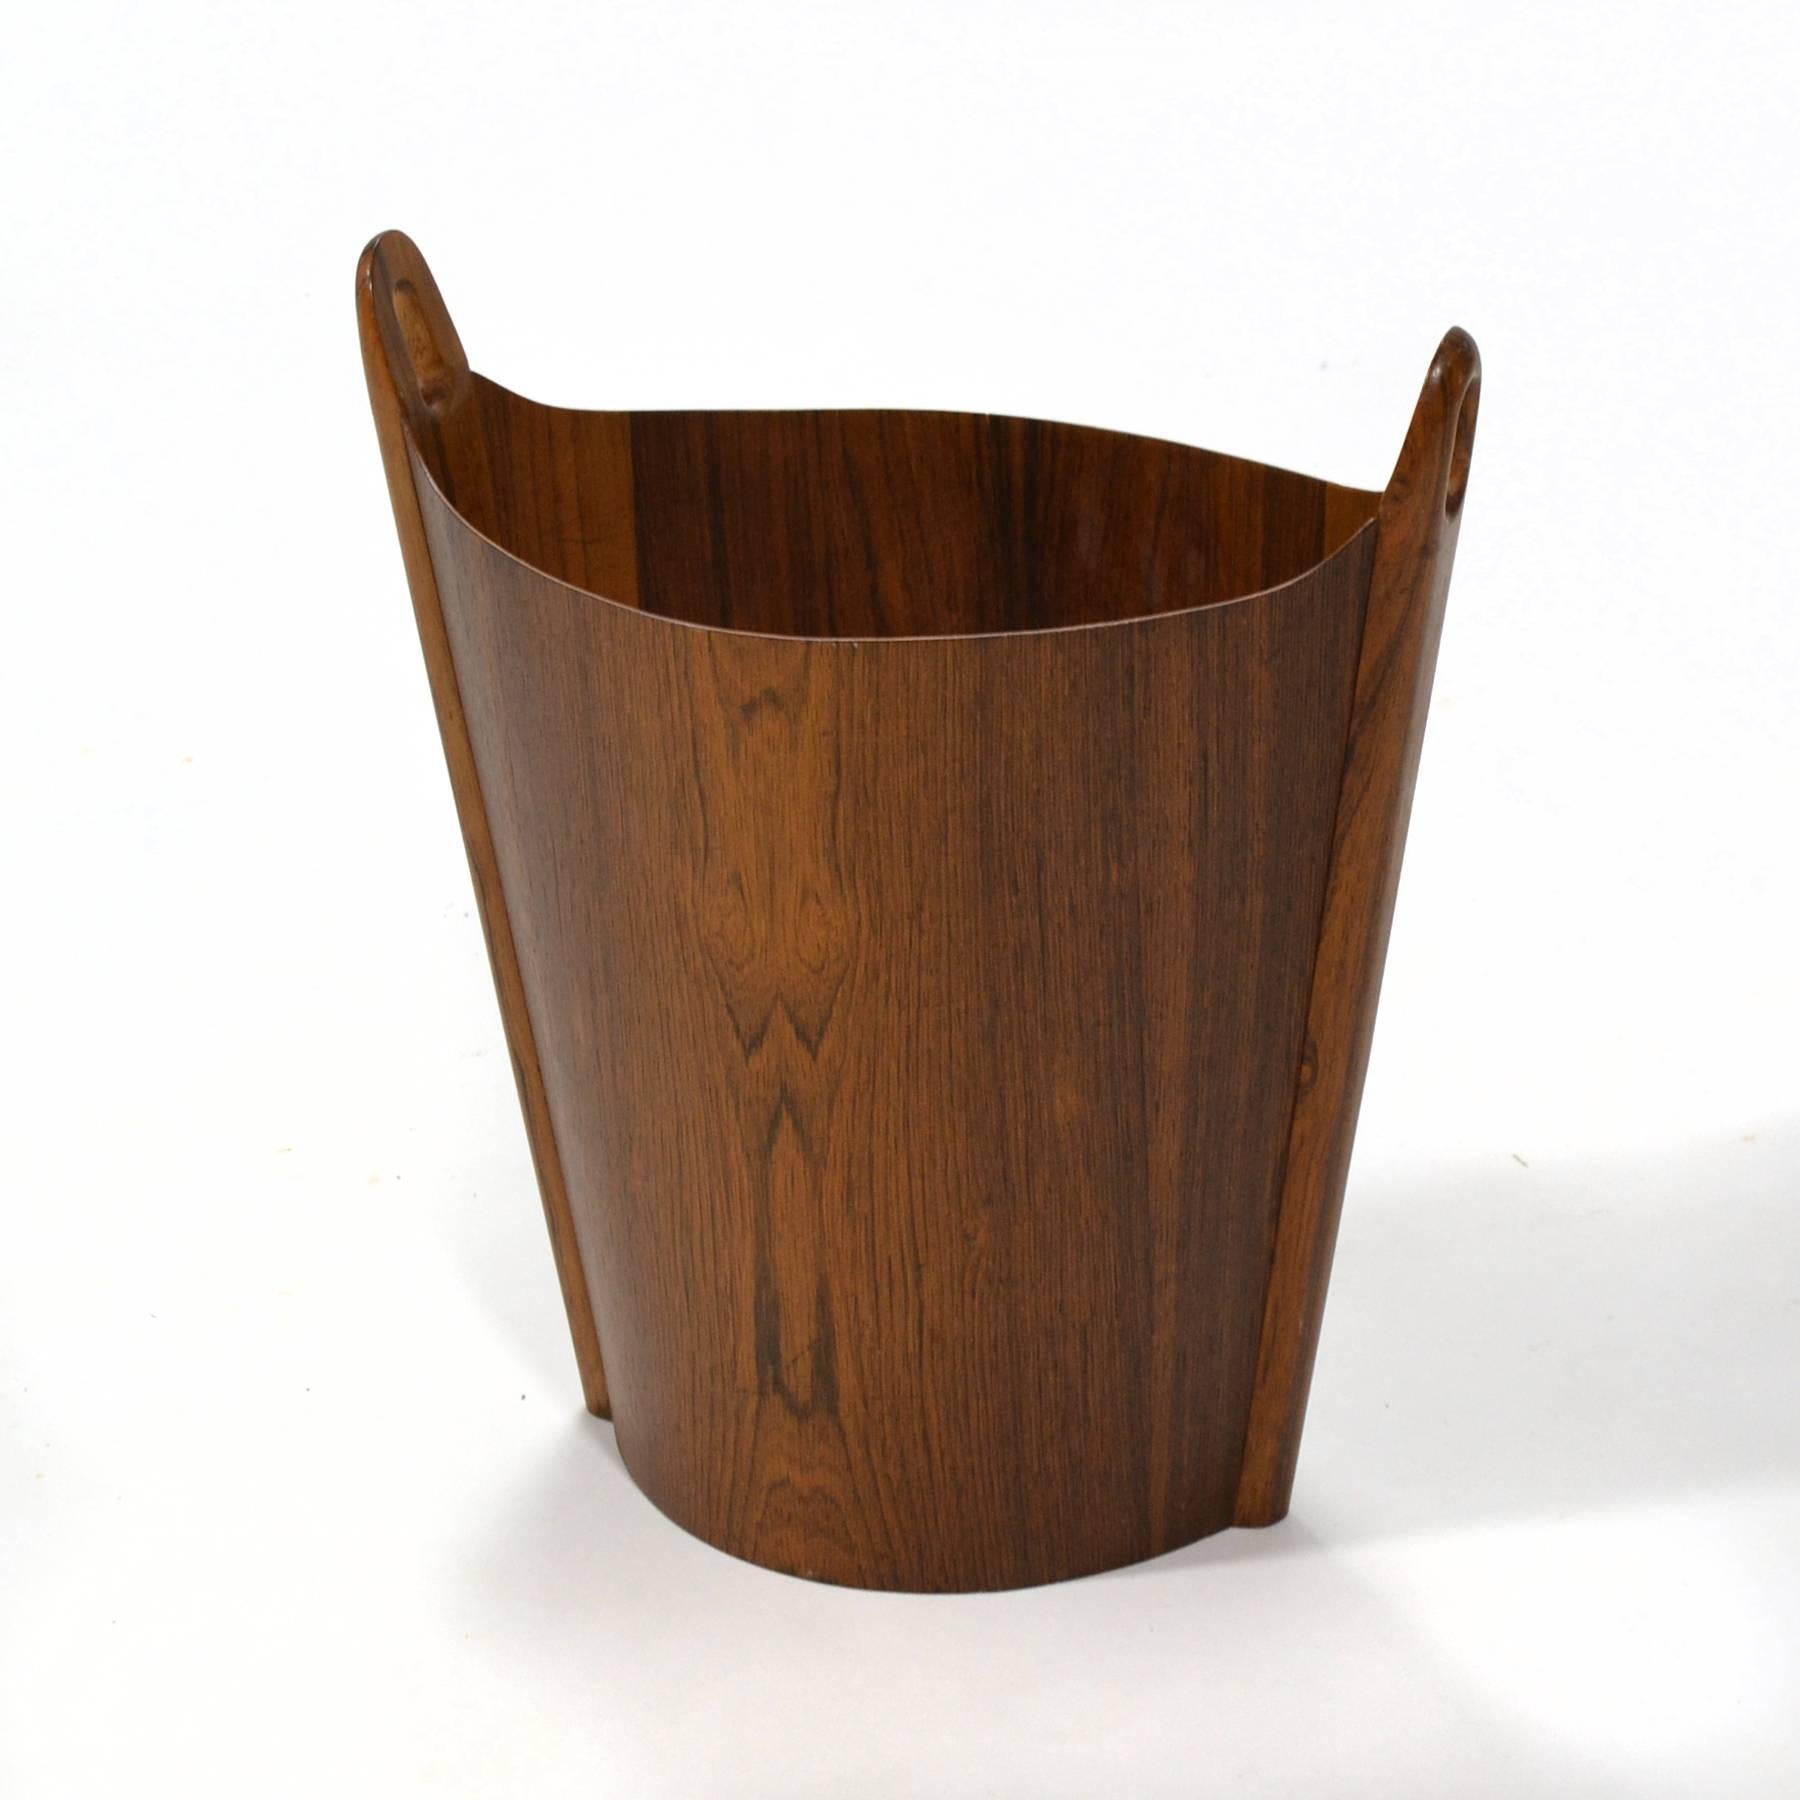 We have seen this wooden wastebasket design by Einar Barnes for P.S. Heggen described as the 